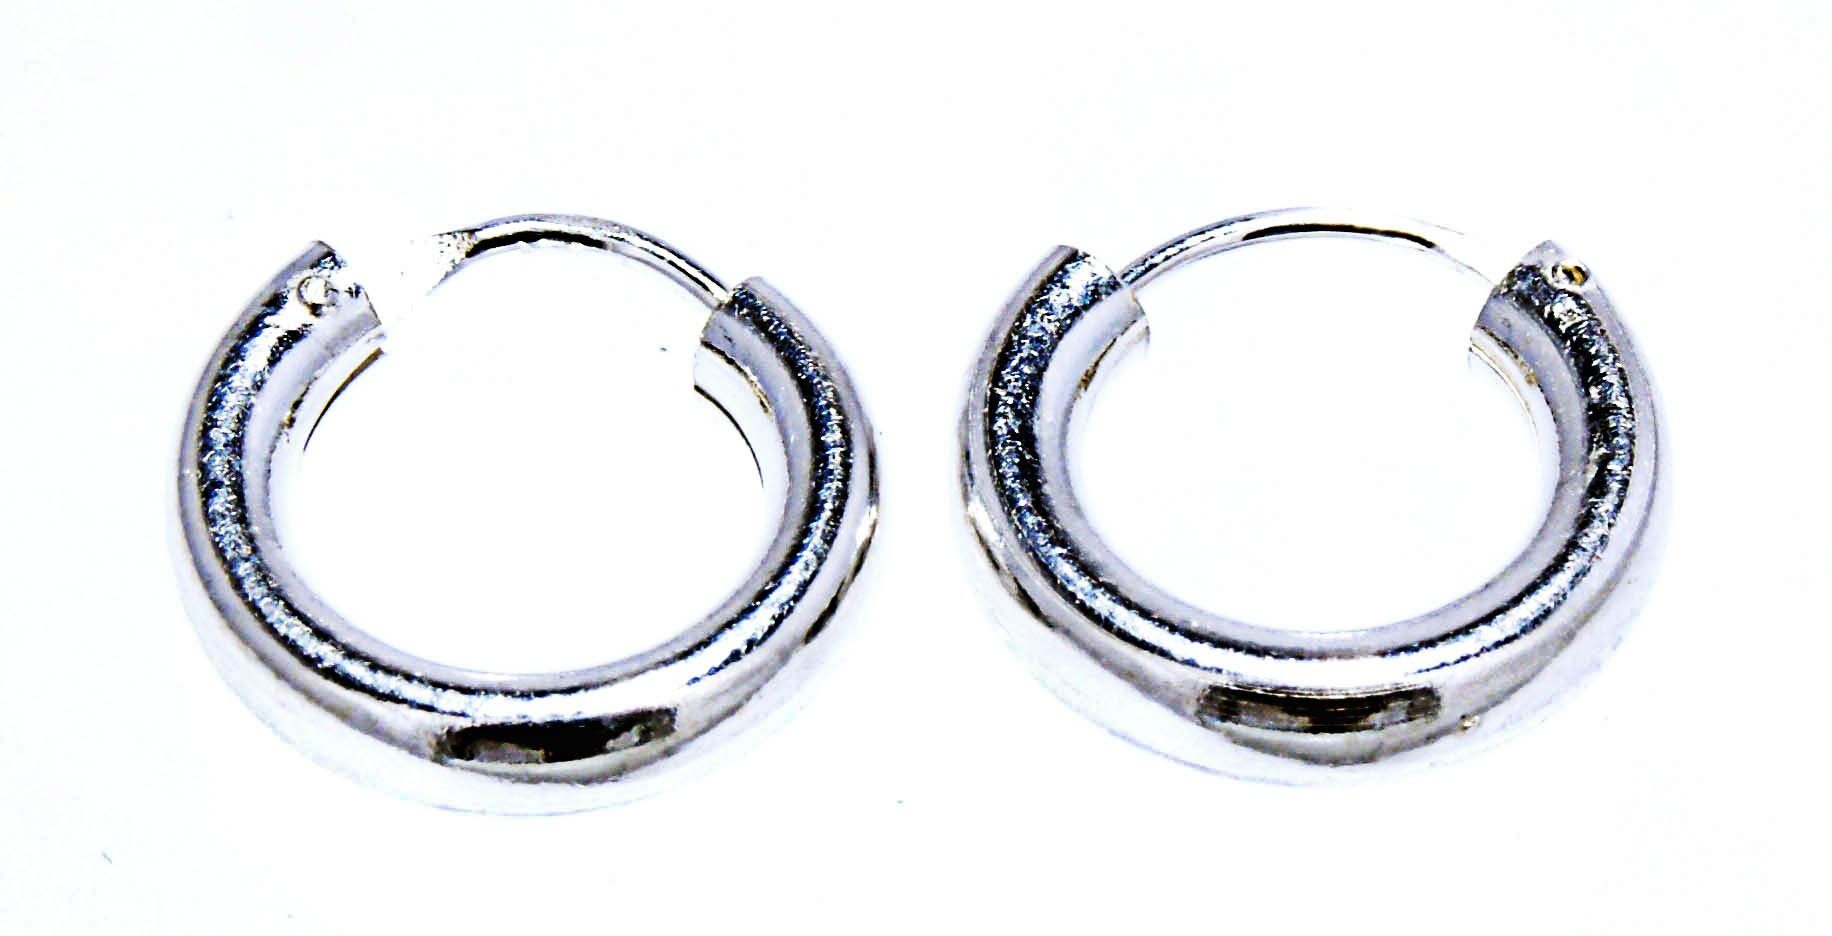 Kiss of Sterling Schlicht Ohr Kreole Leather Silber Ohrring-Set Ohrringe 925 Creole Paarpreis